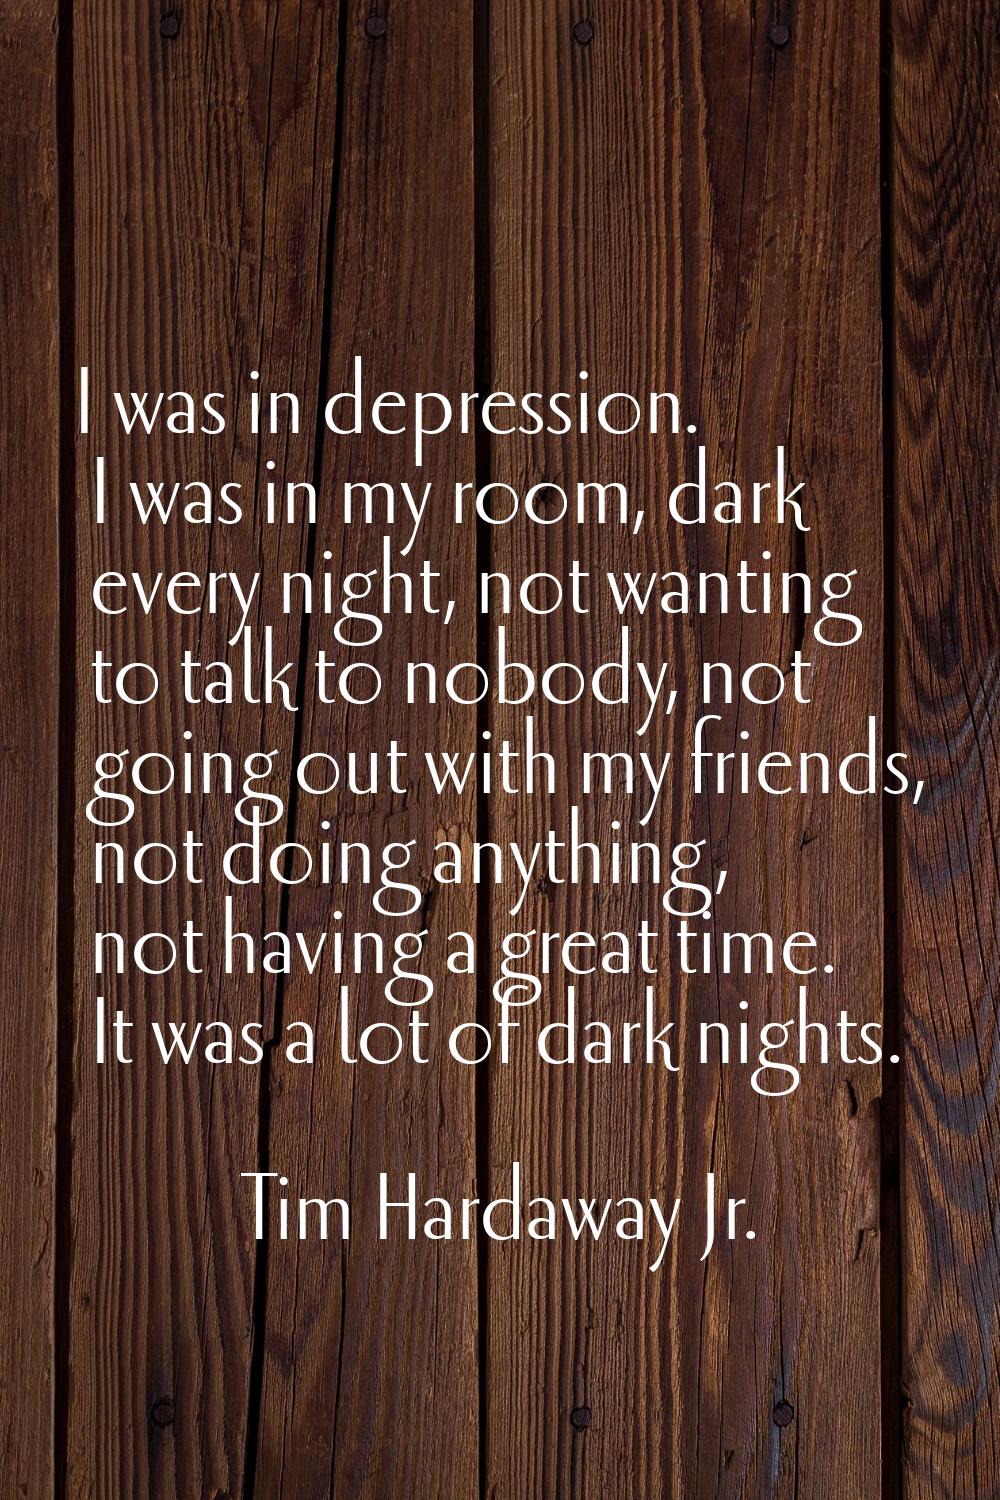 I was in depression. I was in my room, dark every night, not wanting to talk to nobody, not going o